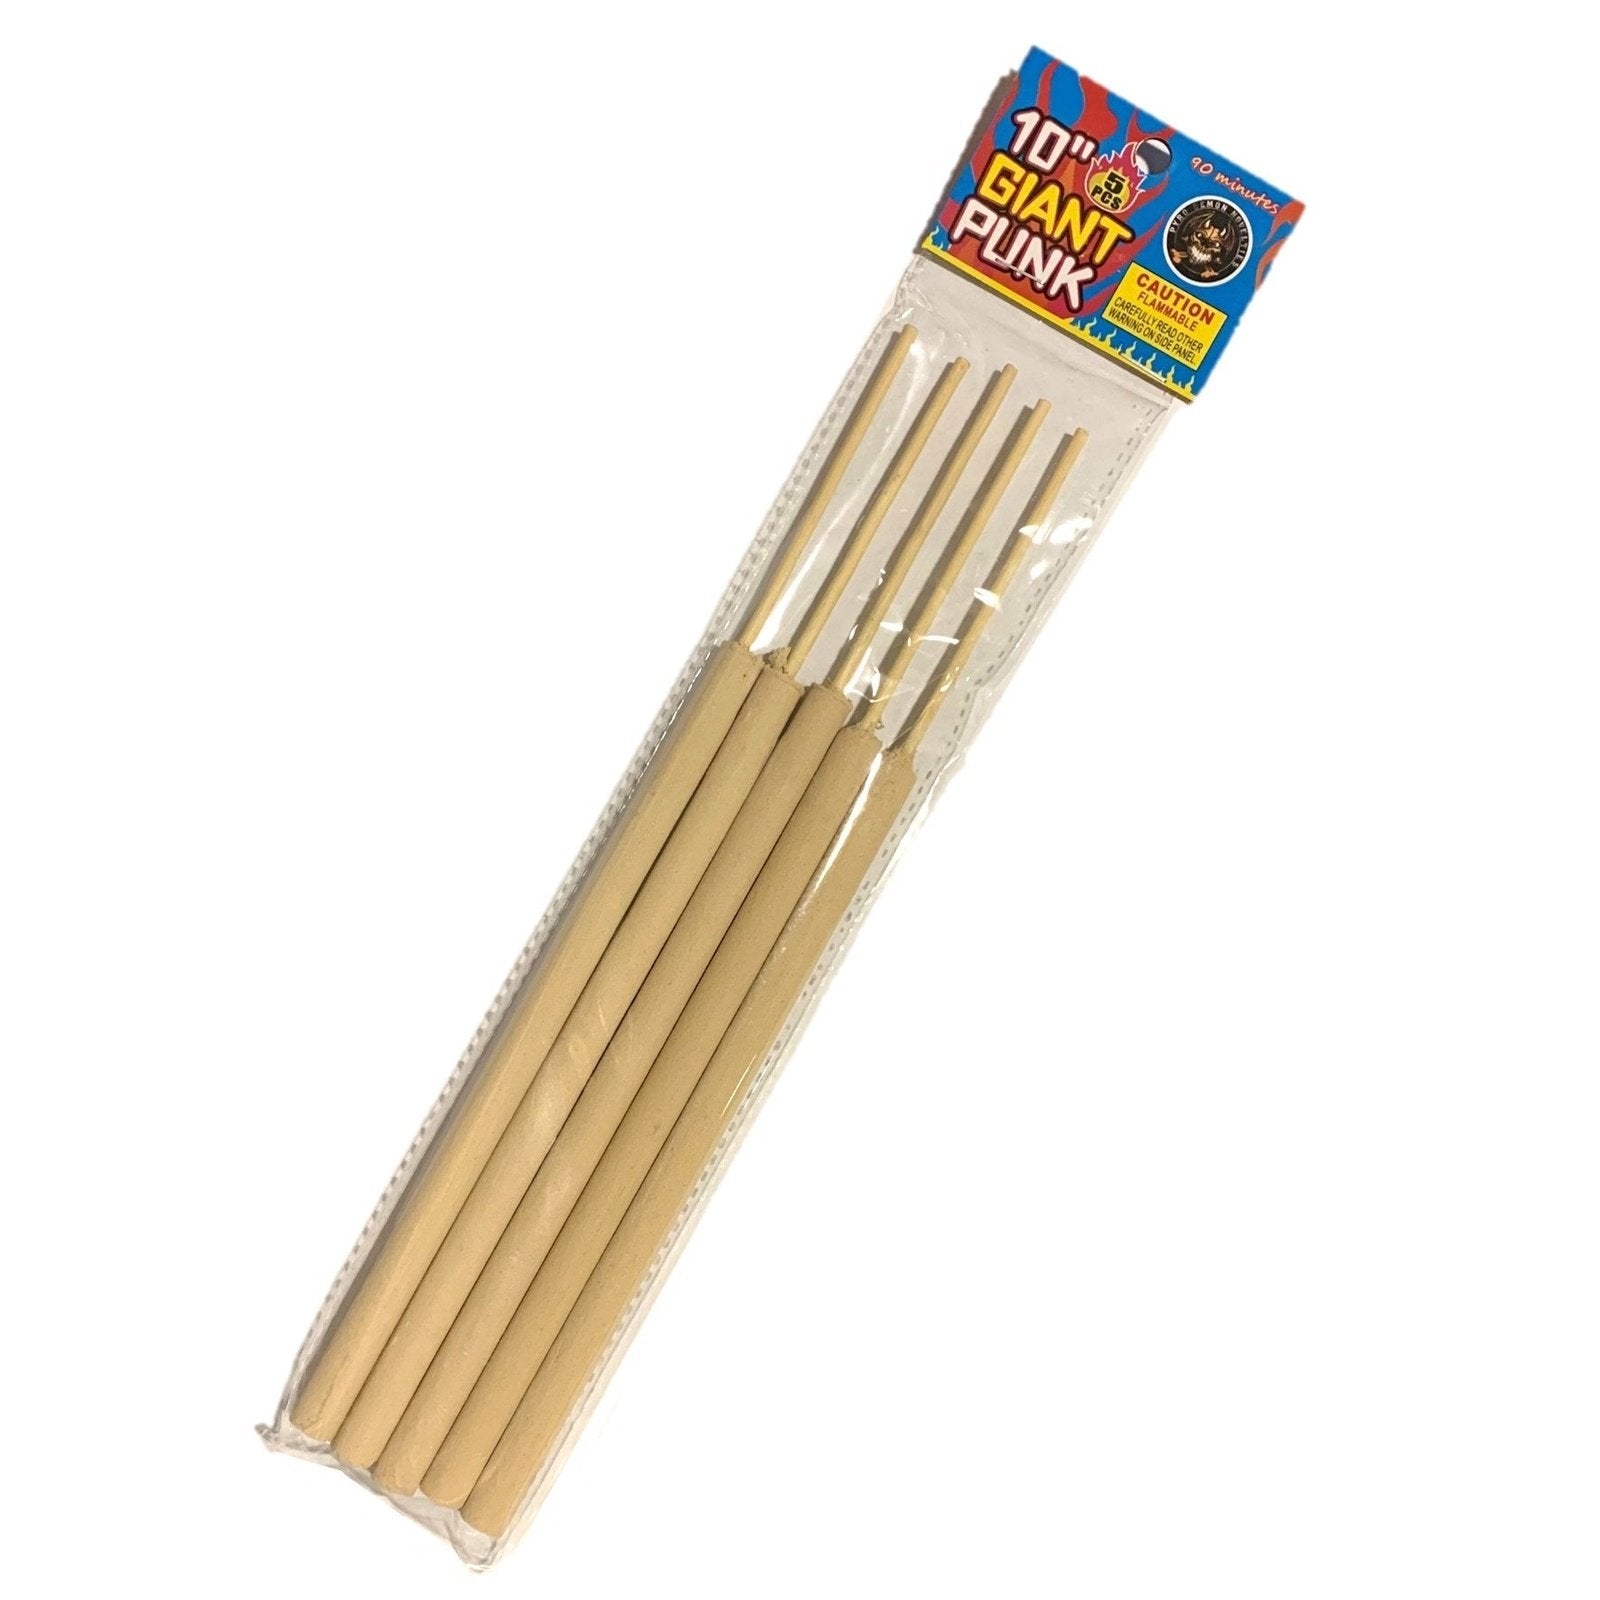 10 Inch Jumbo Punk Non-scented Incense Sticks 5 Pack